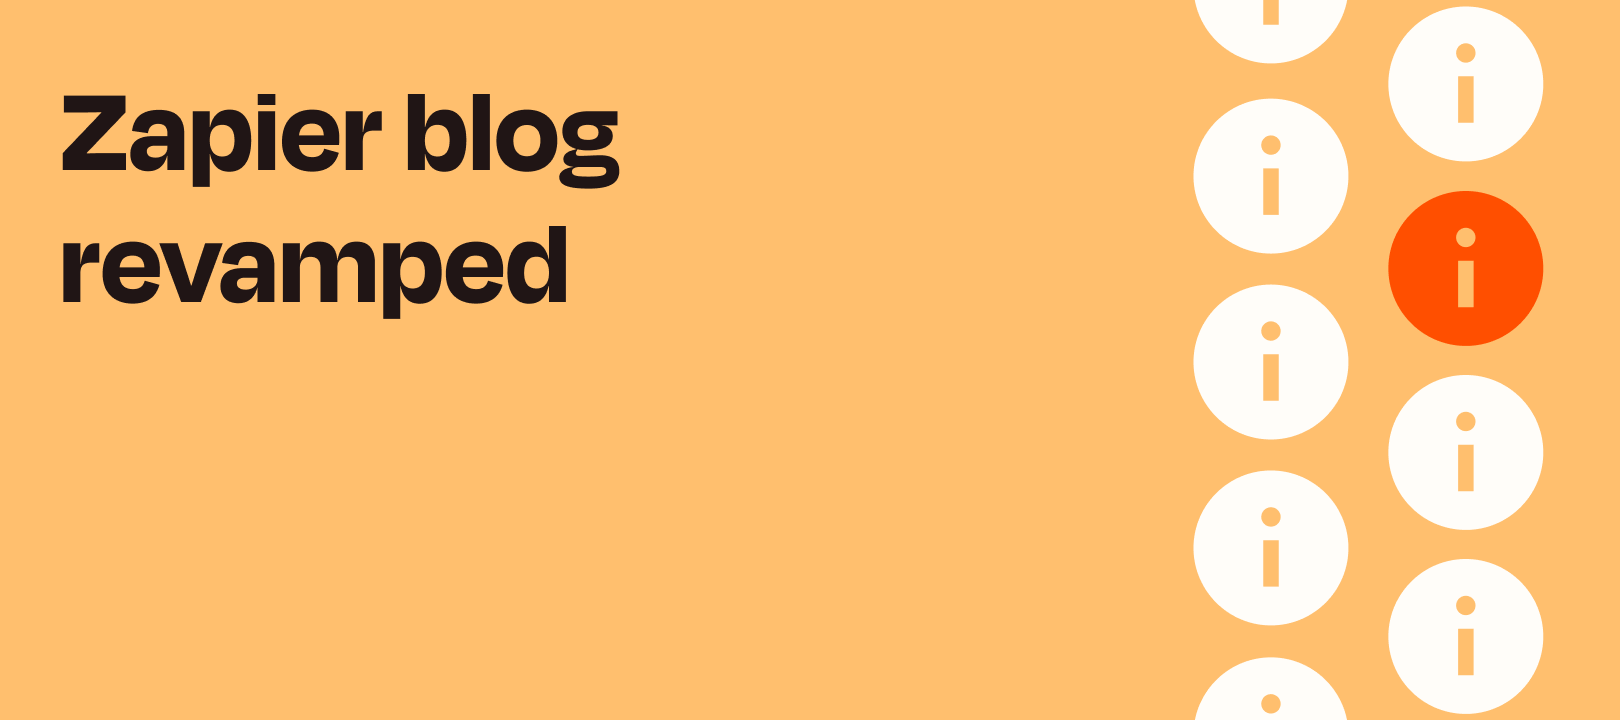 Have you seen the new and improved Zapier blog?